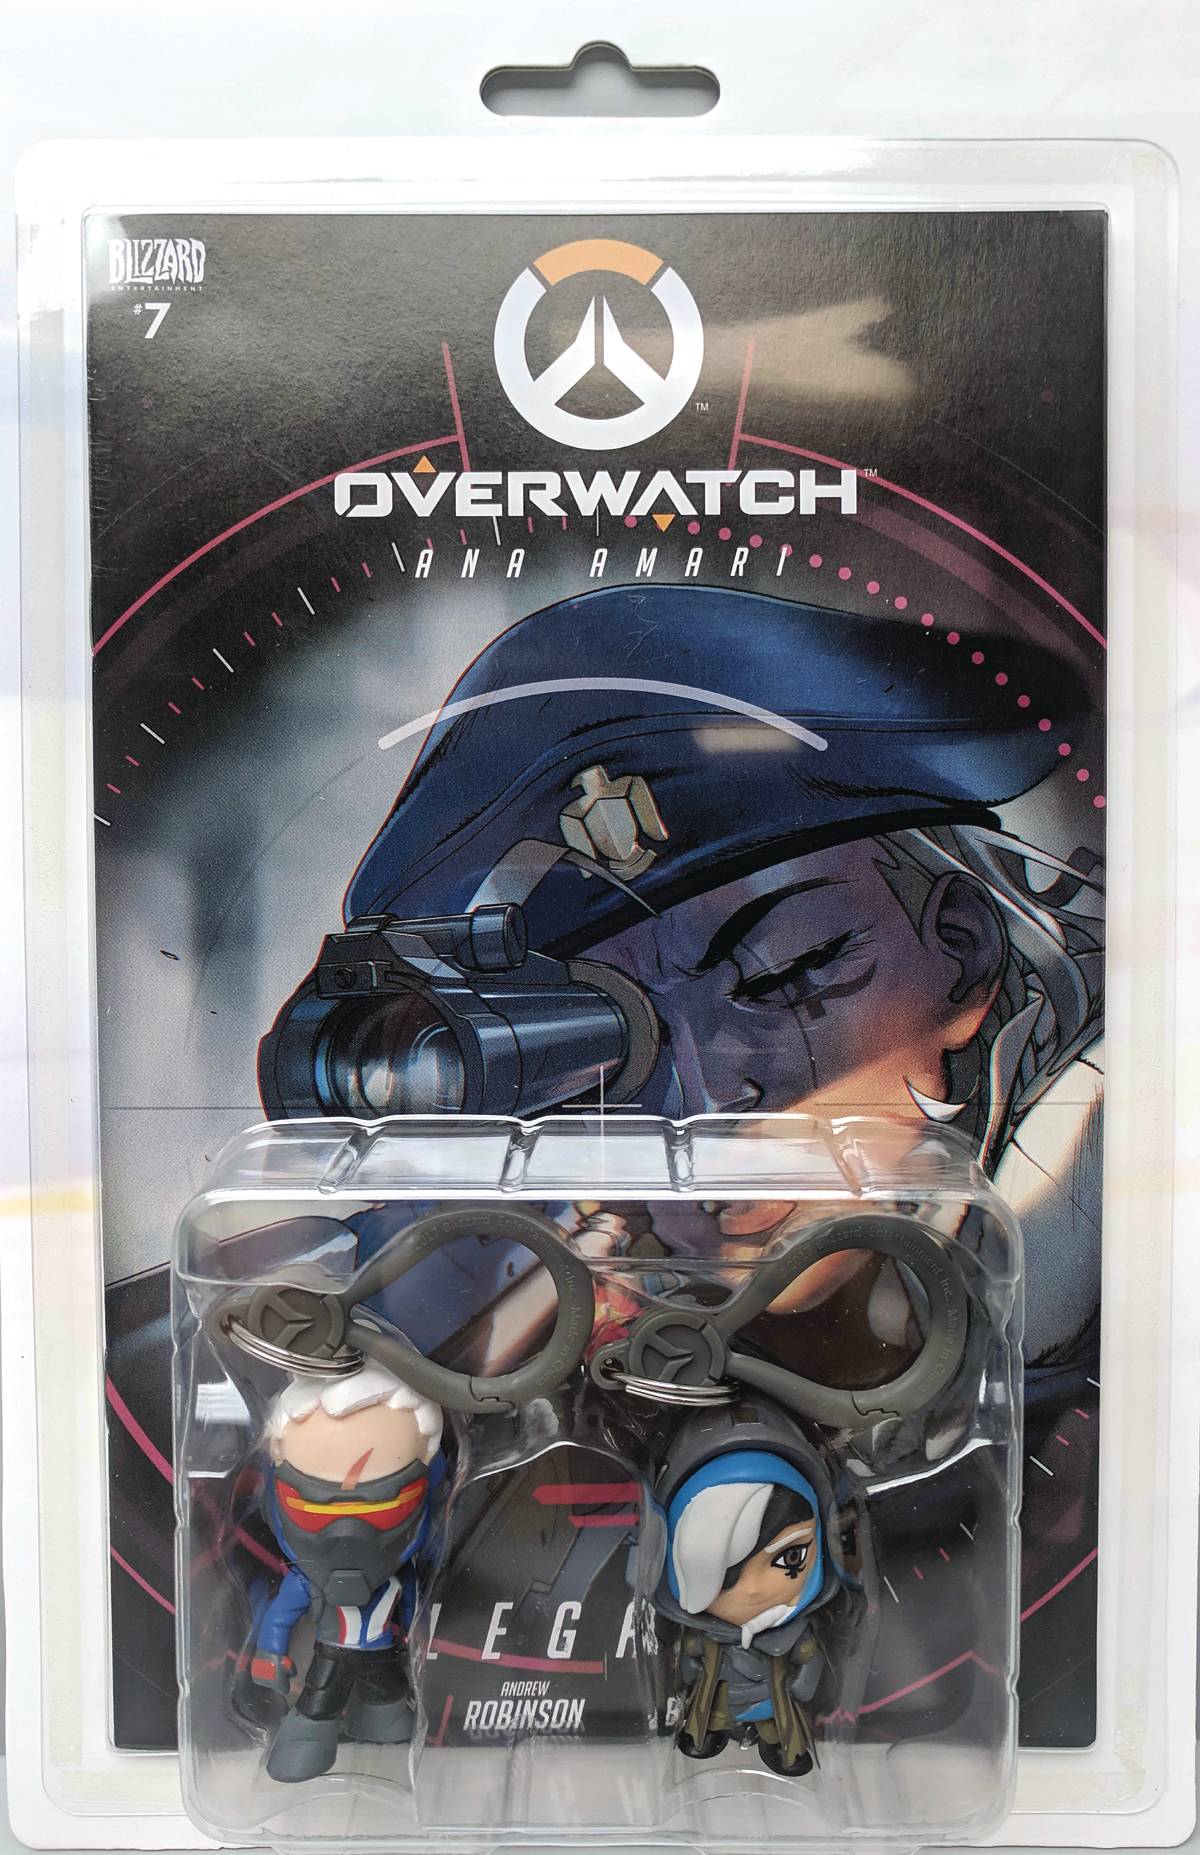 OVERWATCH ANA & SOLDIER 76 COMIC BOOK BACKPACK CLIP 2 PACK (